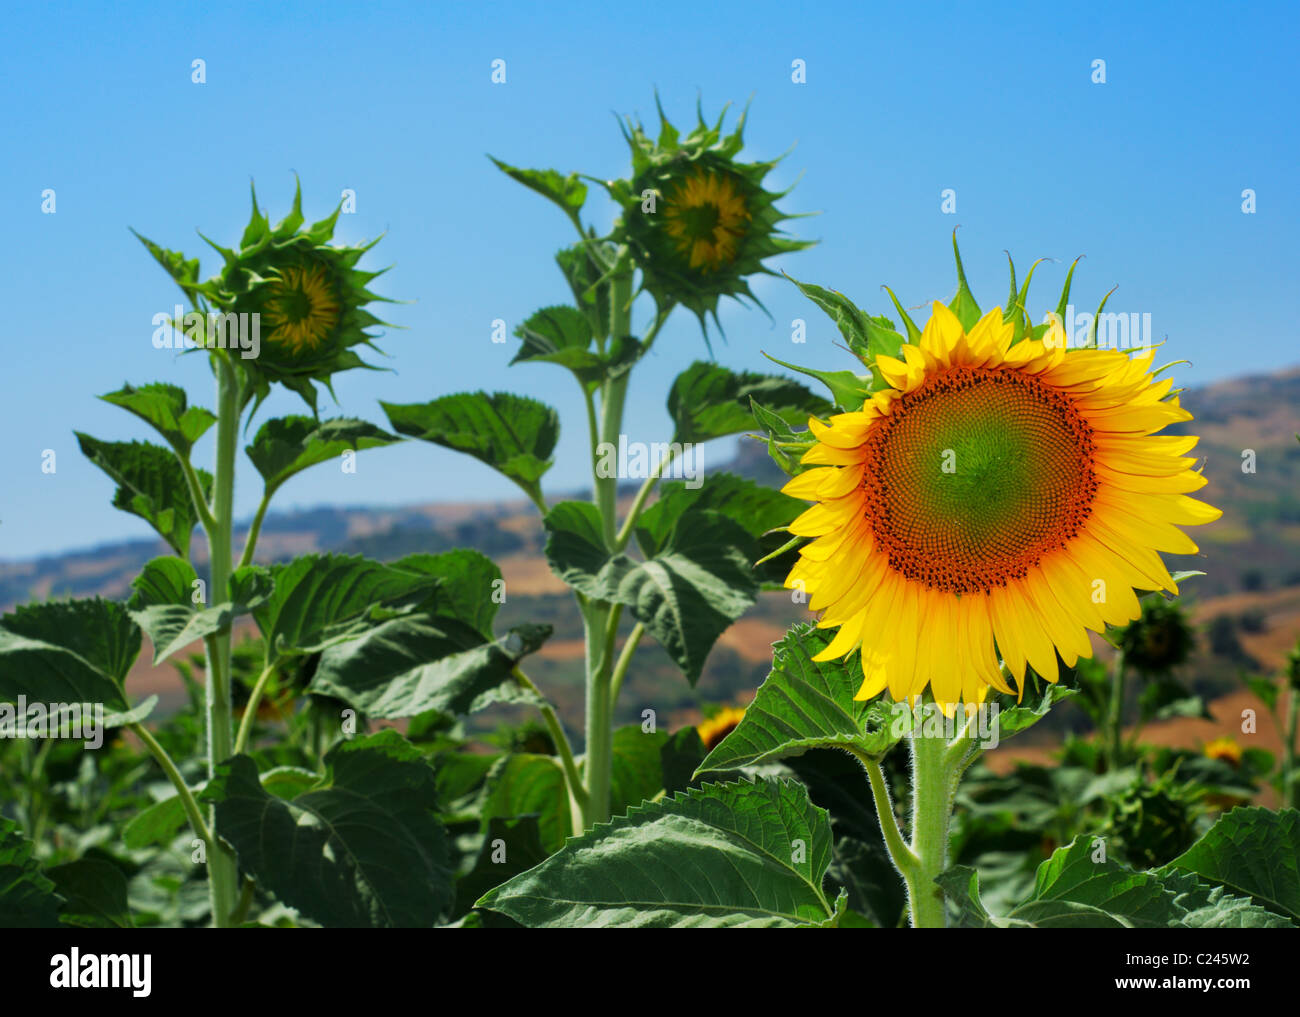 Sunflower buds with one open flower in a field Stock Photo